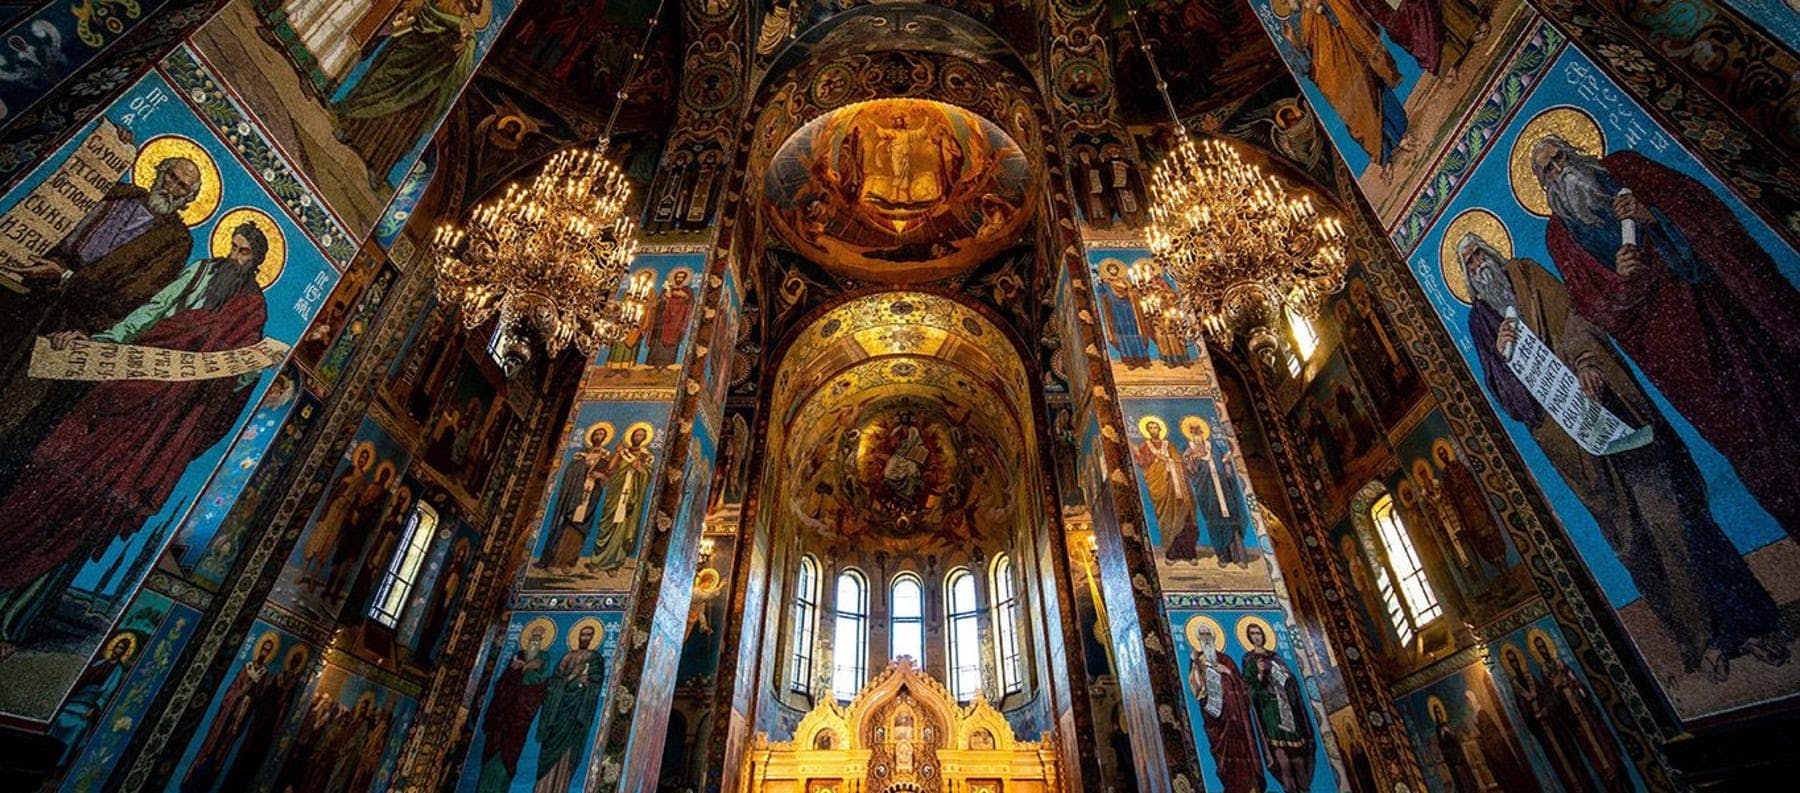 Church of the Savior on Spilt Blood in Moscow, Russia